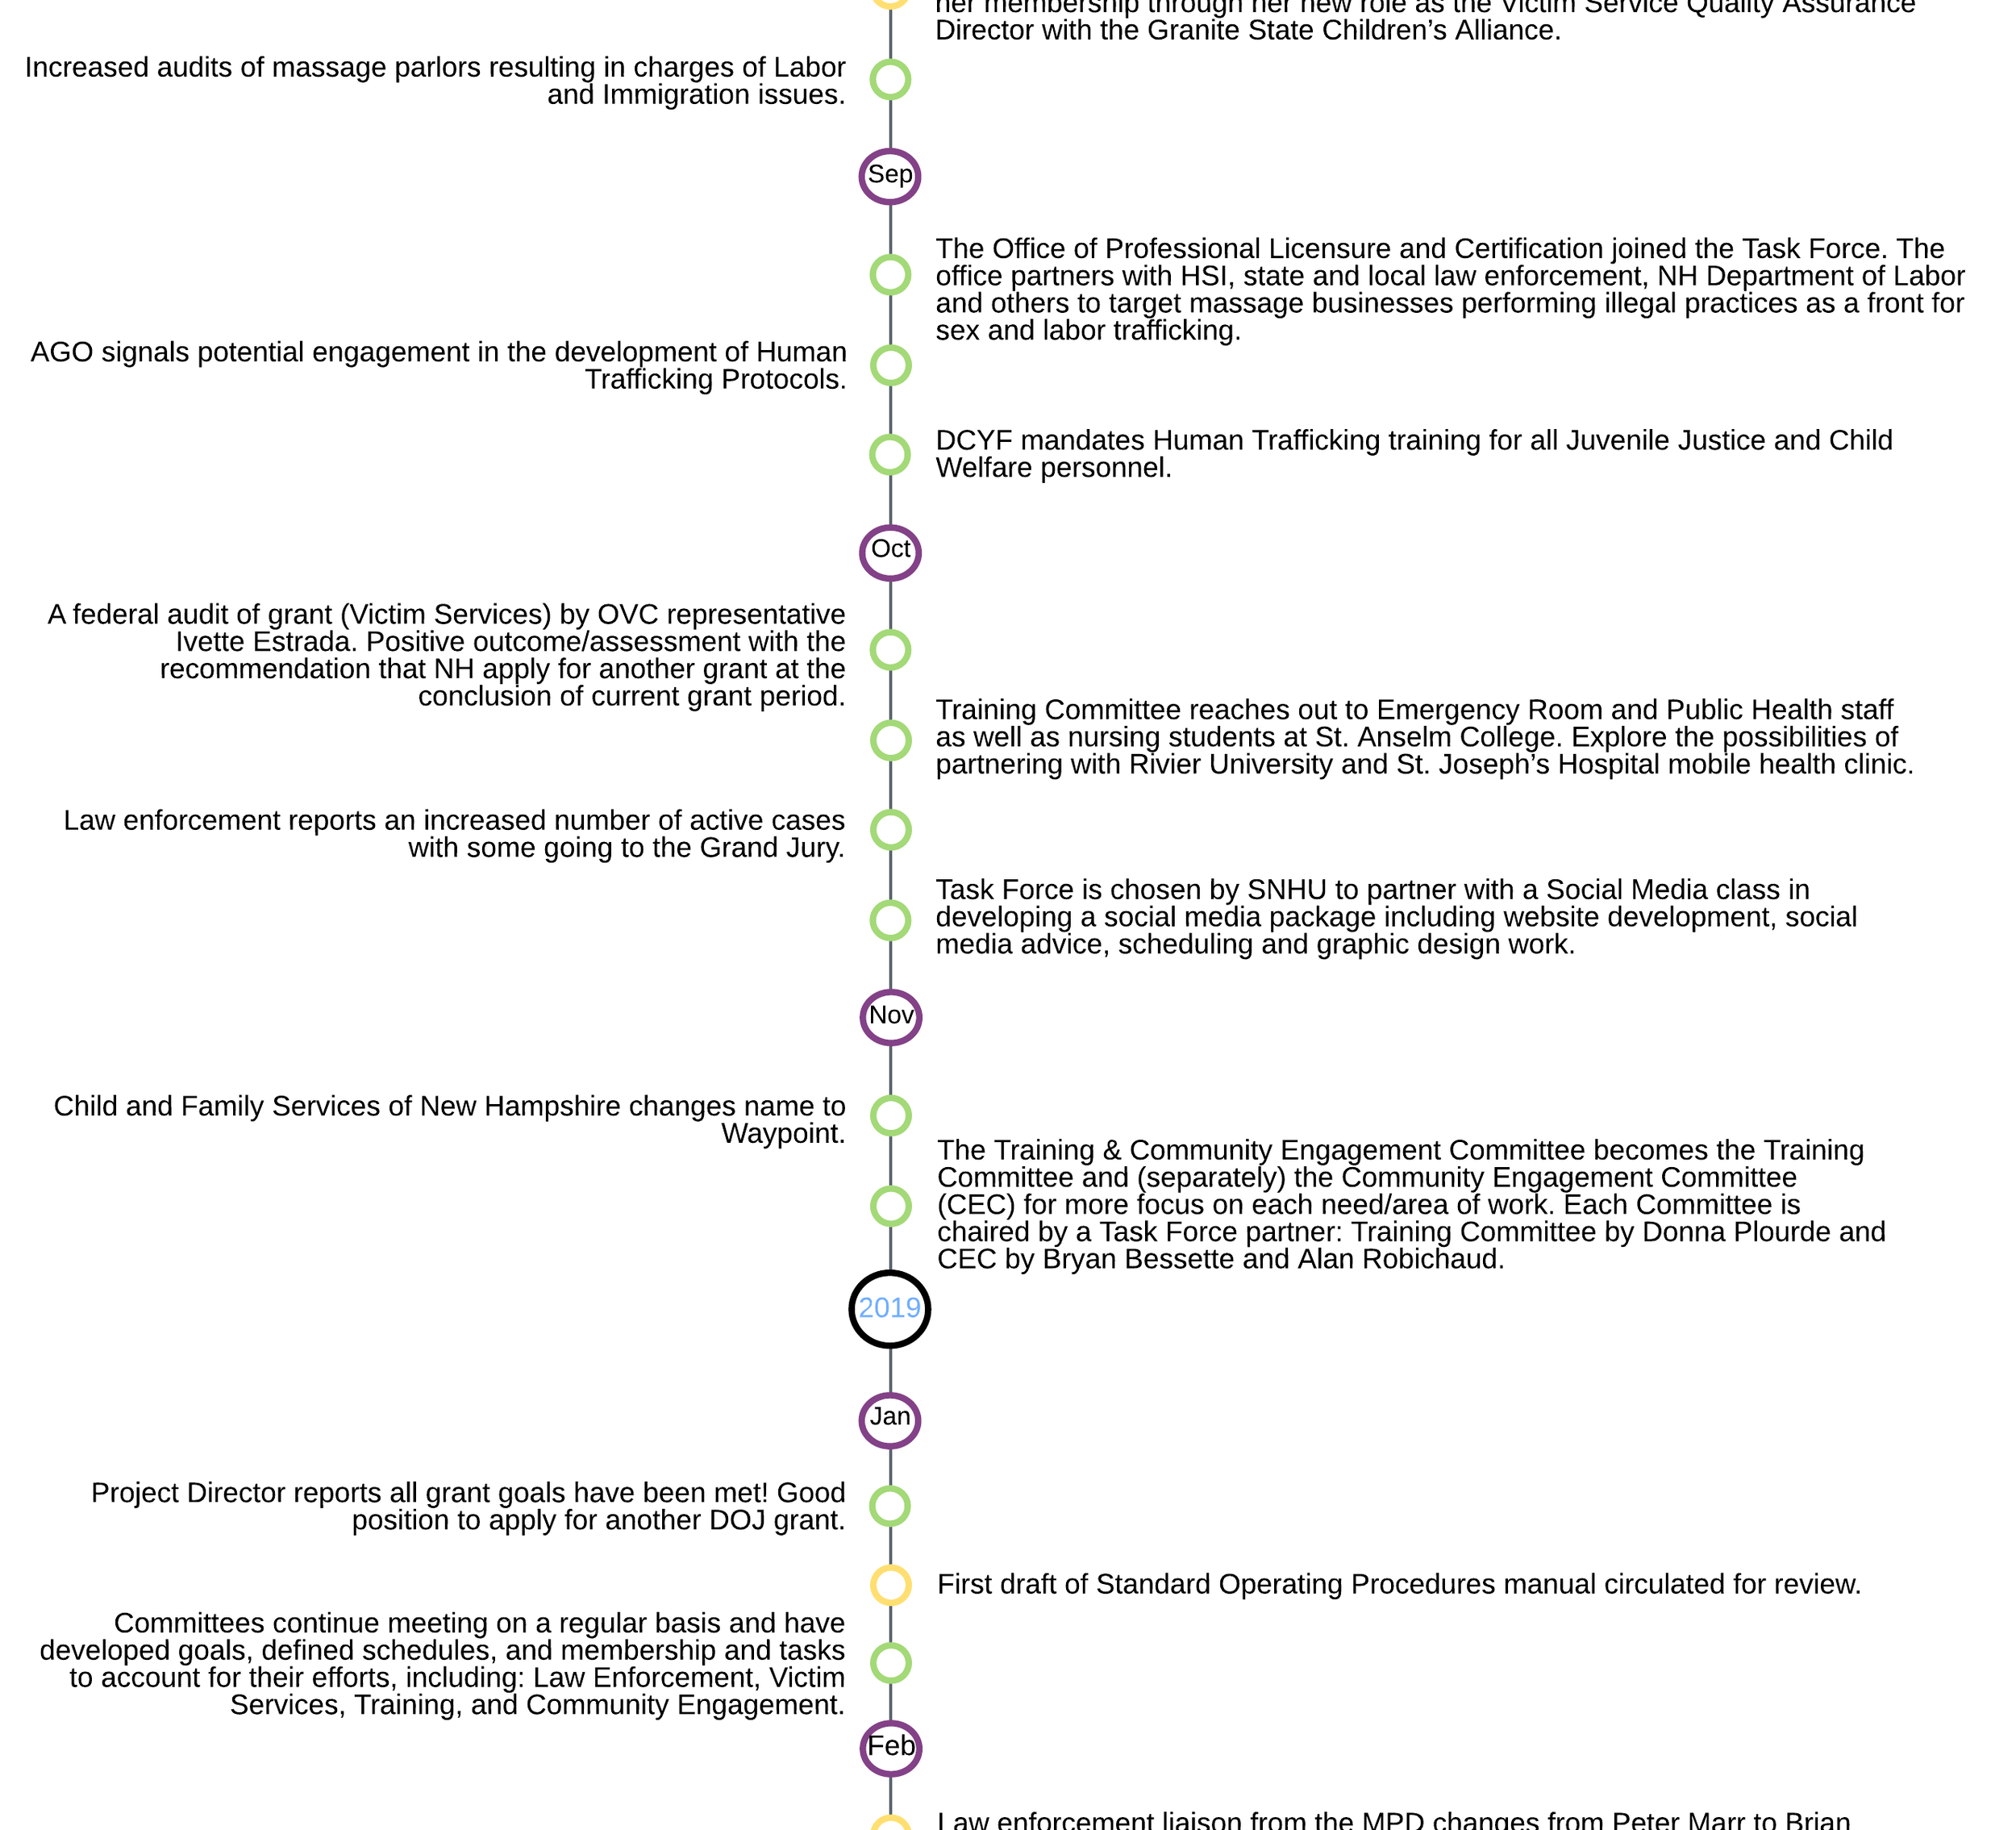 New Hampshire Human Trafficking Task Force Timeline - Copy_7x1.png